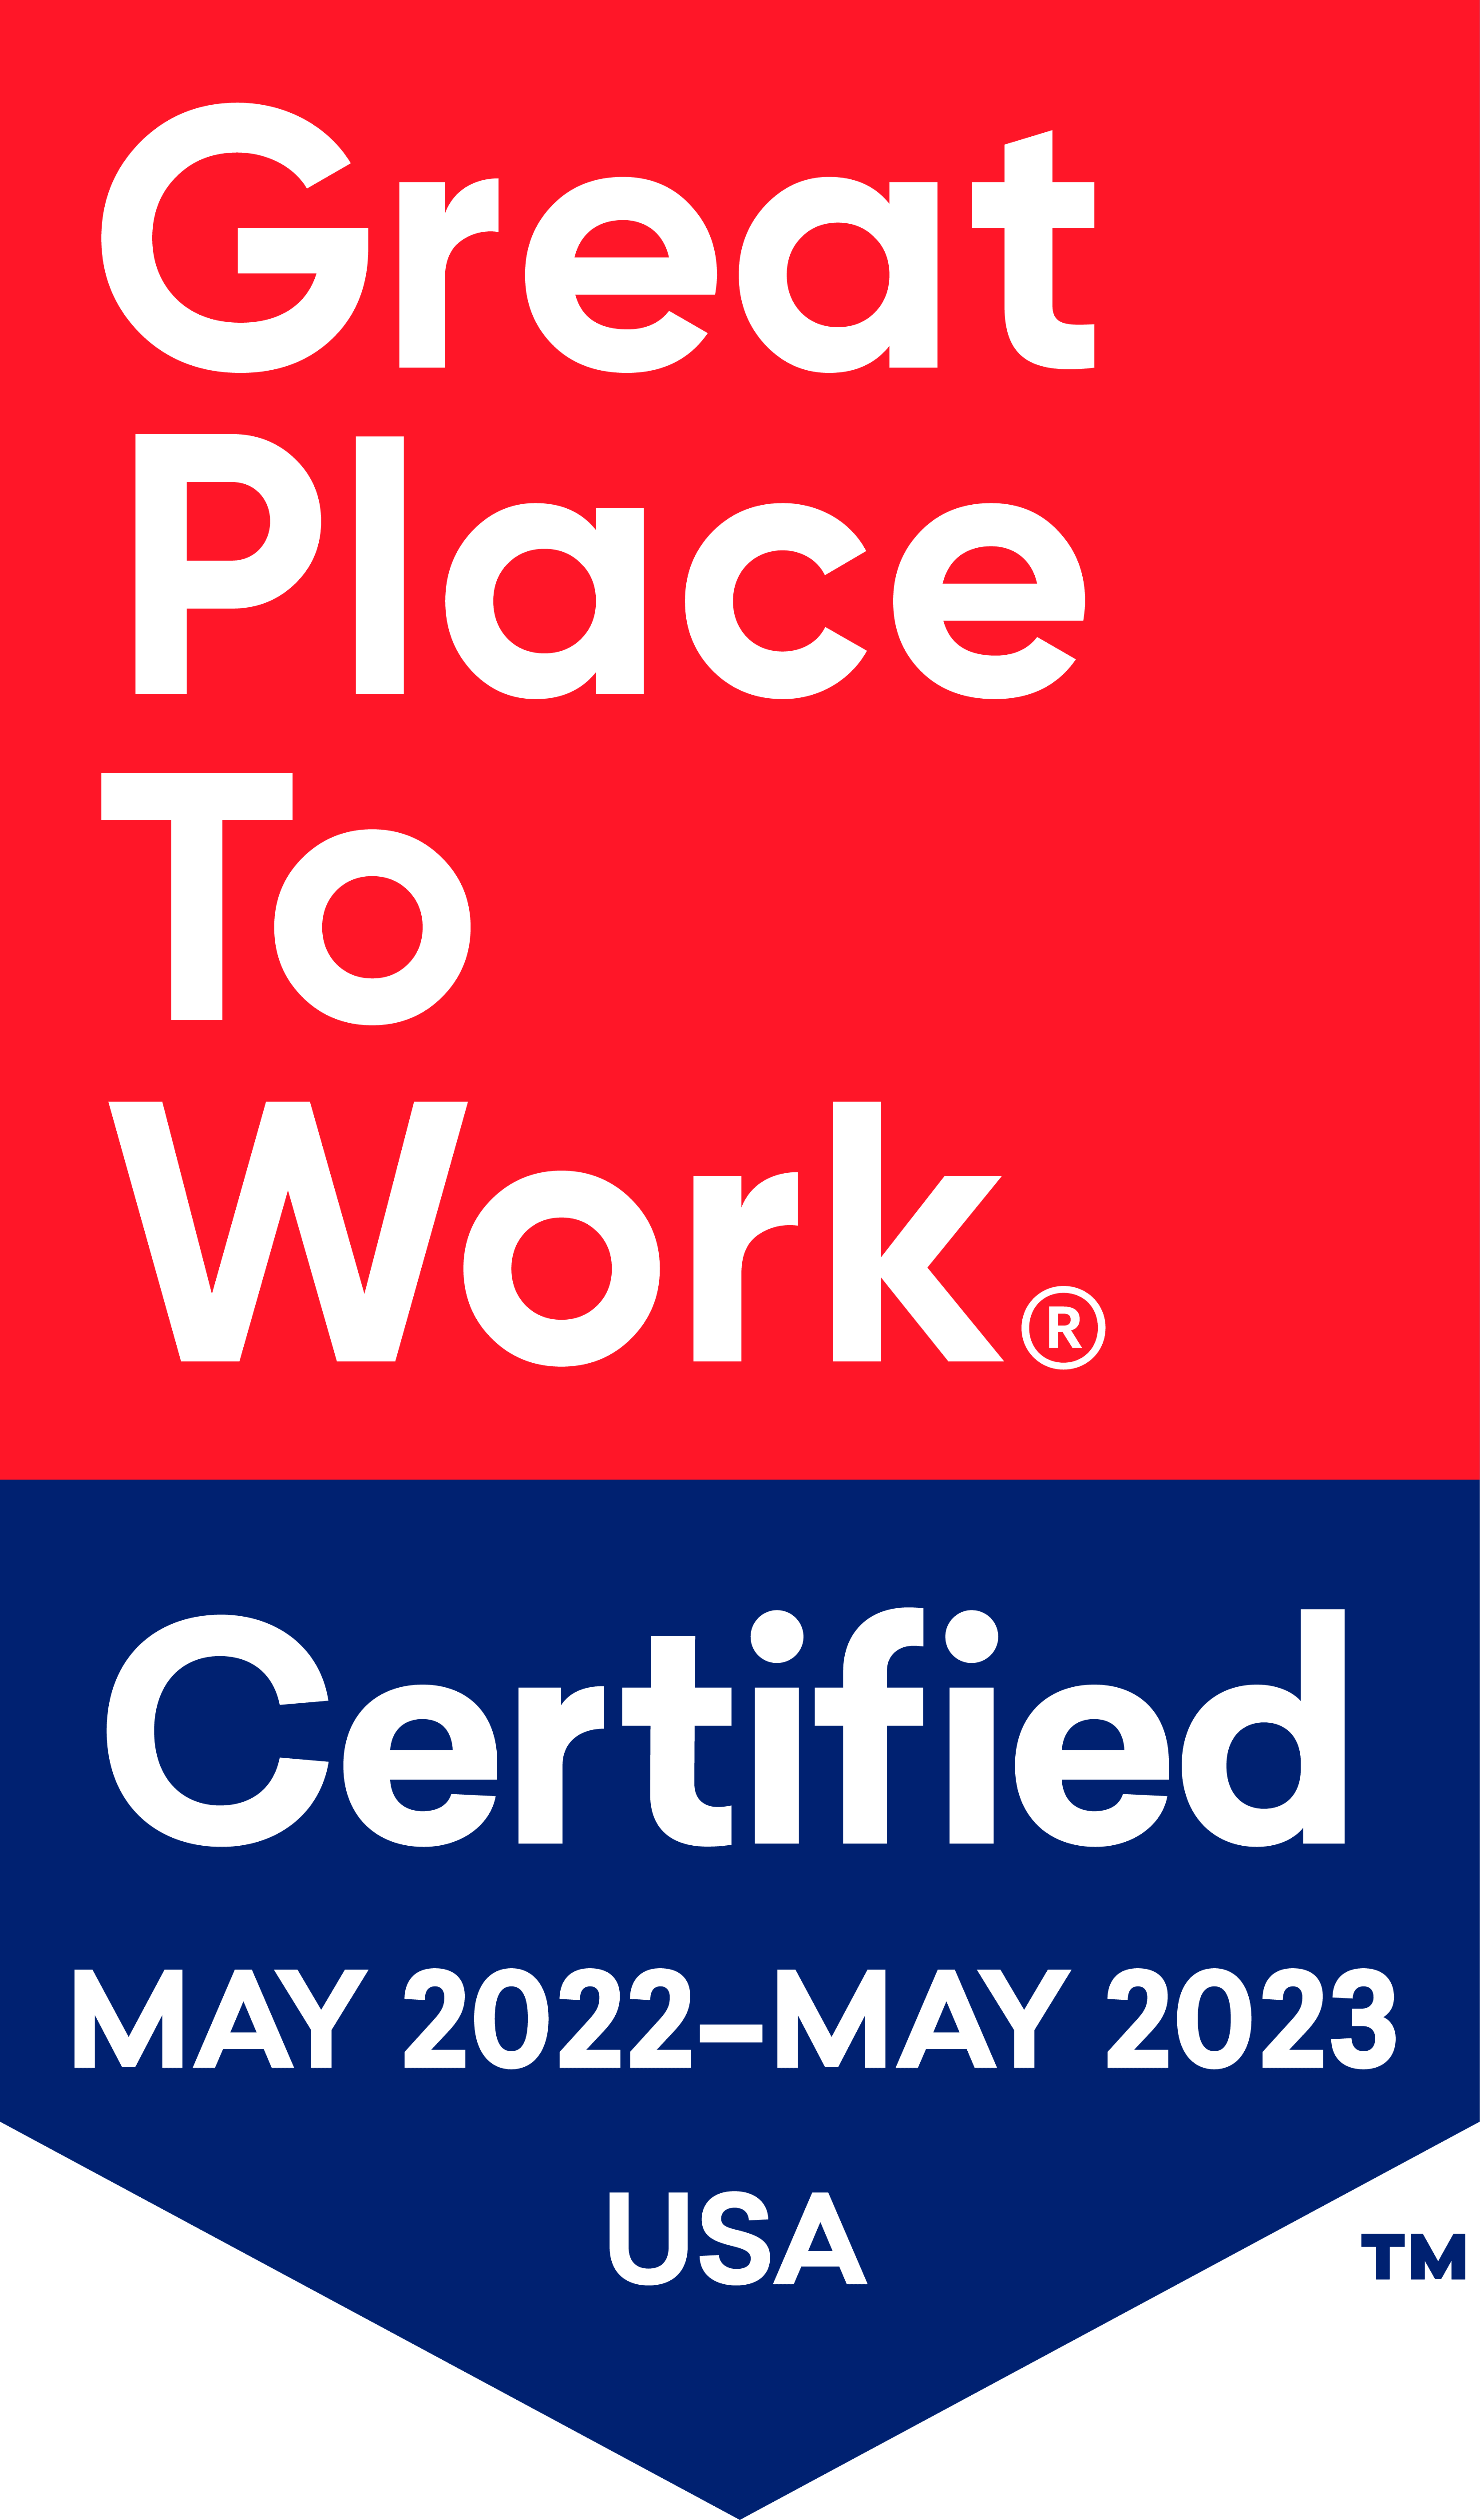 Mountlake Terrace Plaza is Great Place To Work Certified